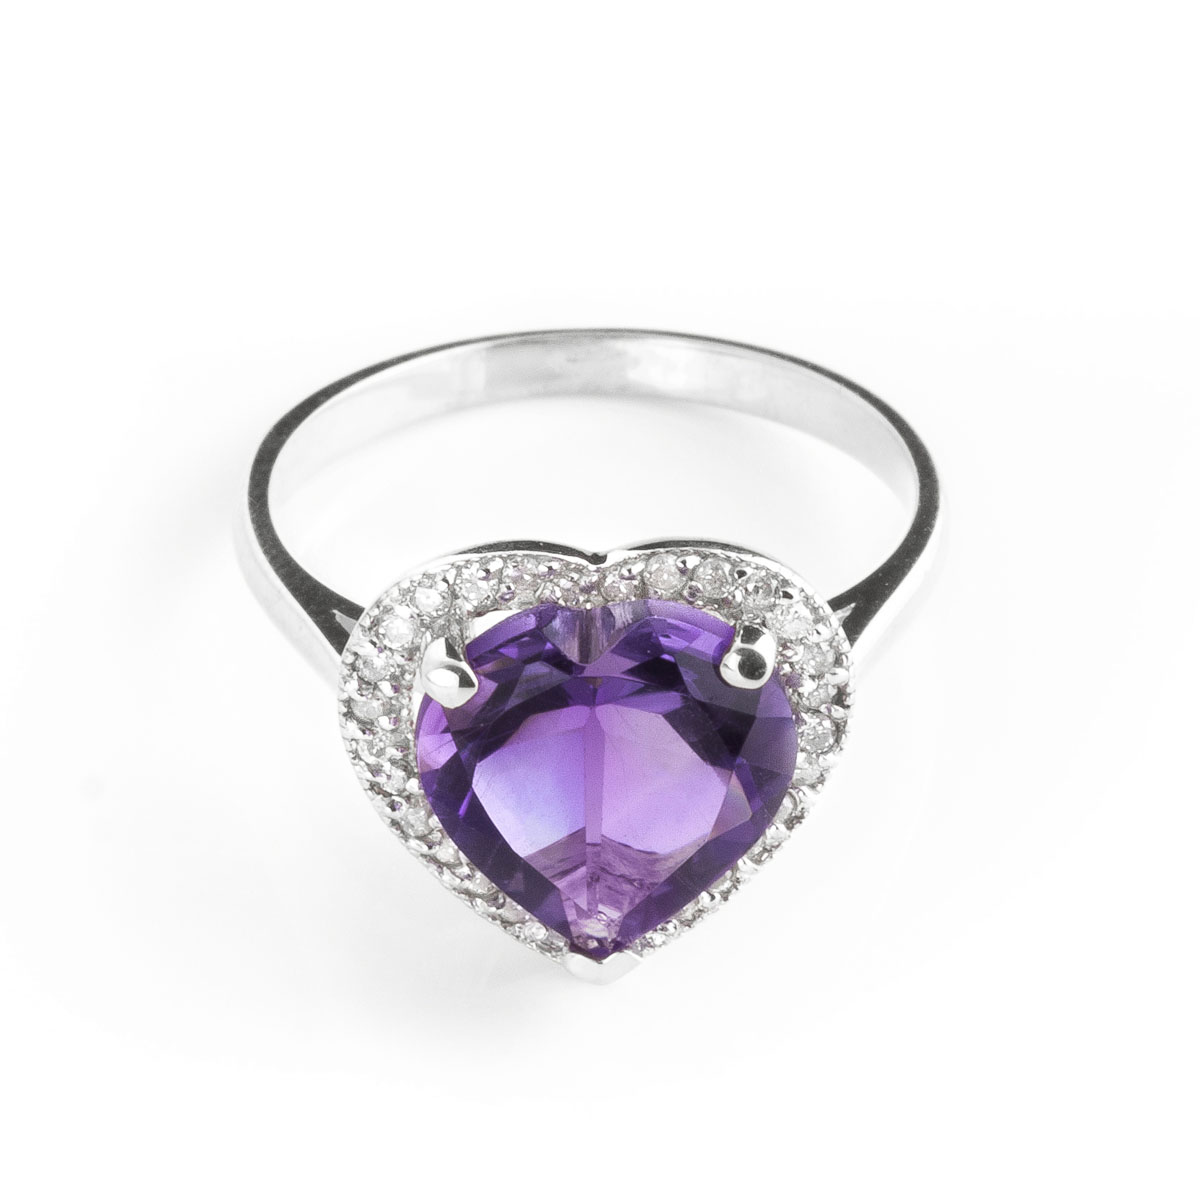 Amethyst Halo Ring 3.24 ctw in 18ct White Gold